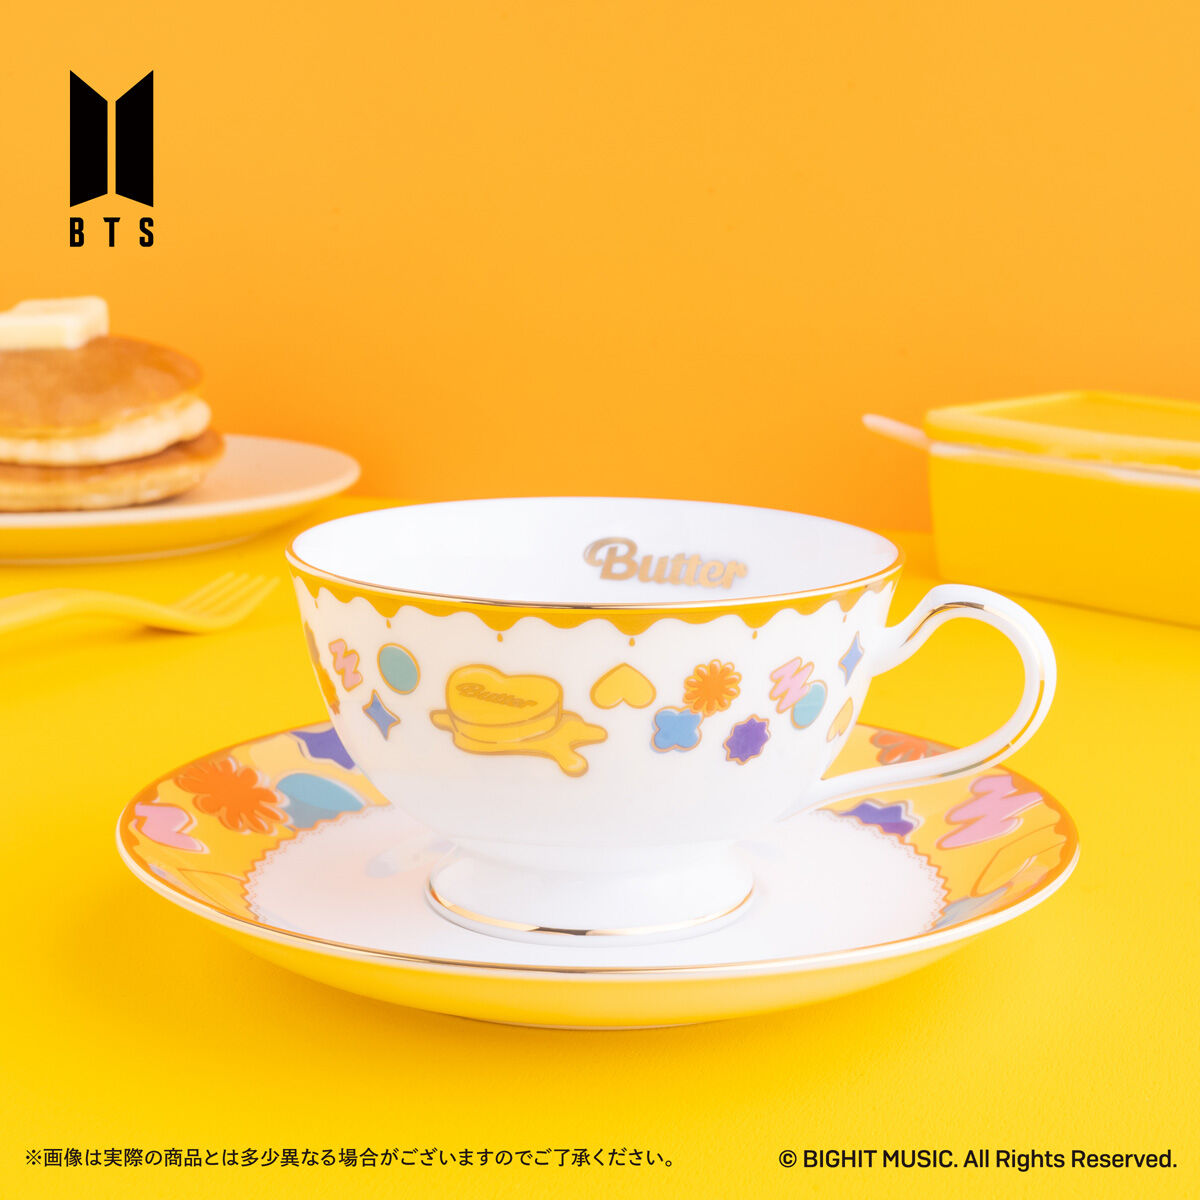 Noritake Cup＆Saucer set BTS Music Theme Boy With Luv ver